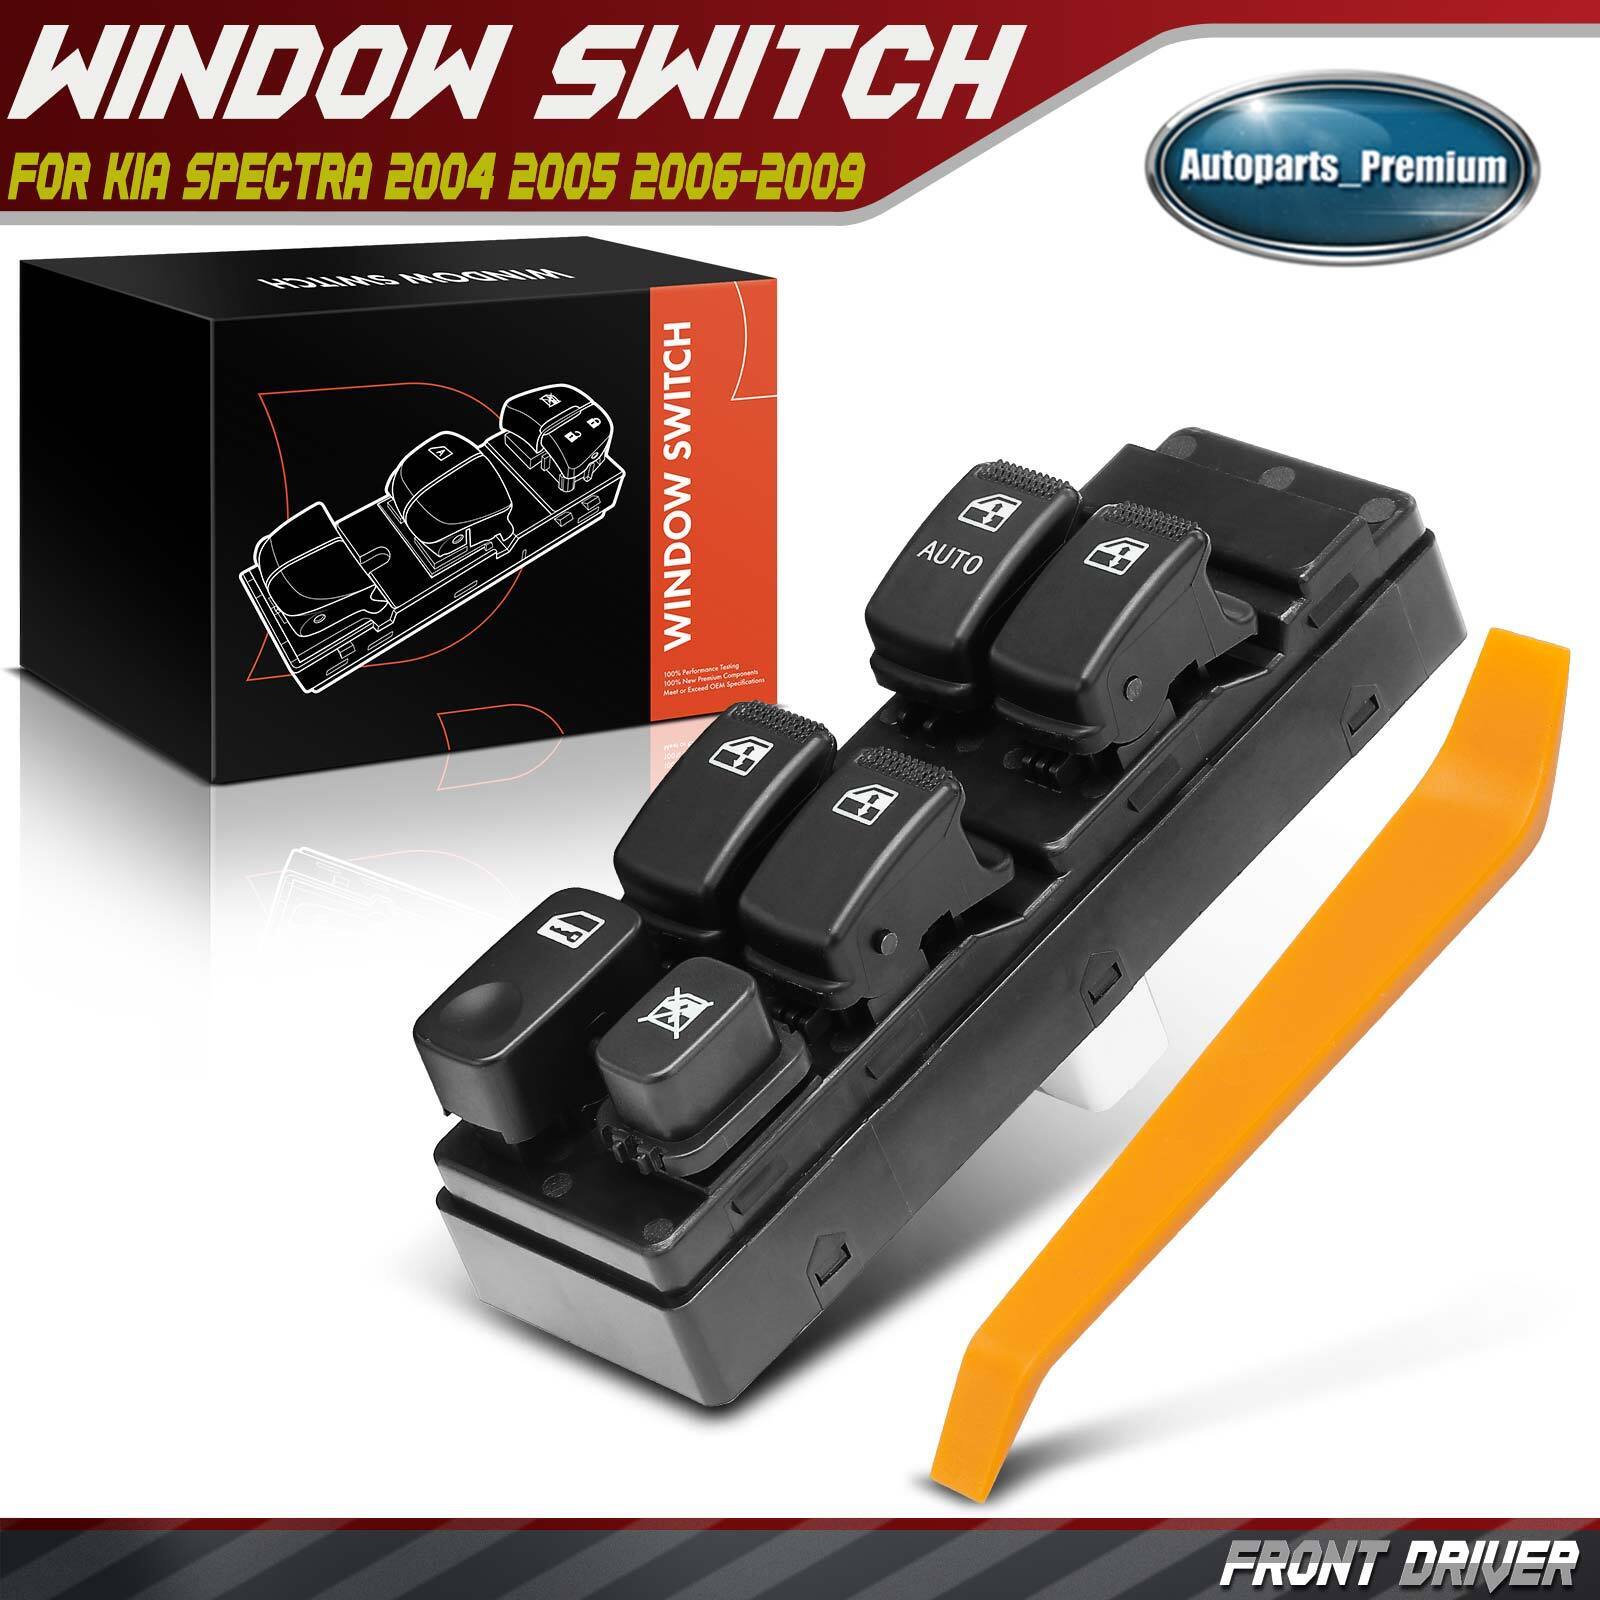 Front Driver Left Side Power Window Switch for Kia Spectra 2004 2005 2006-2009